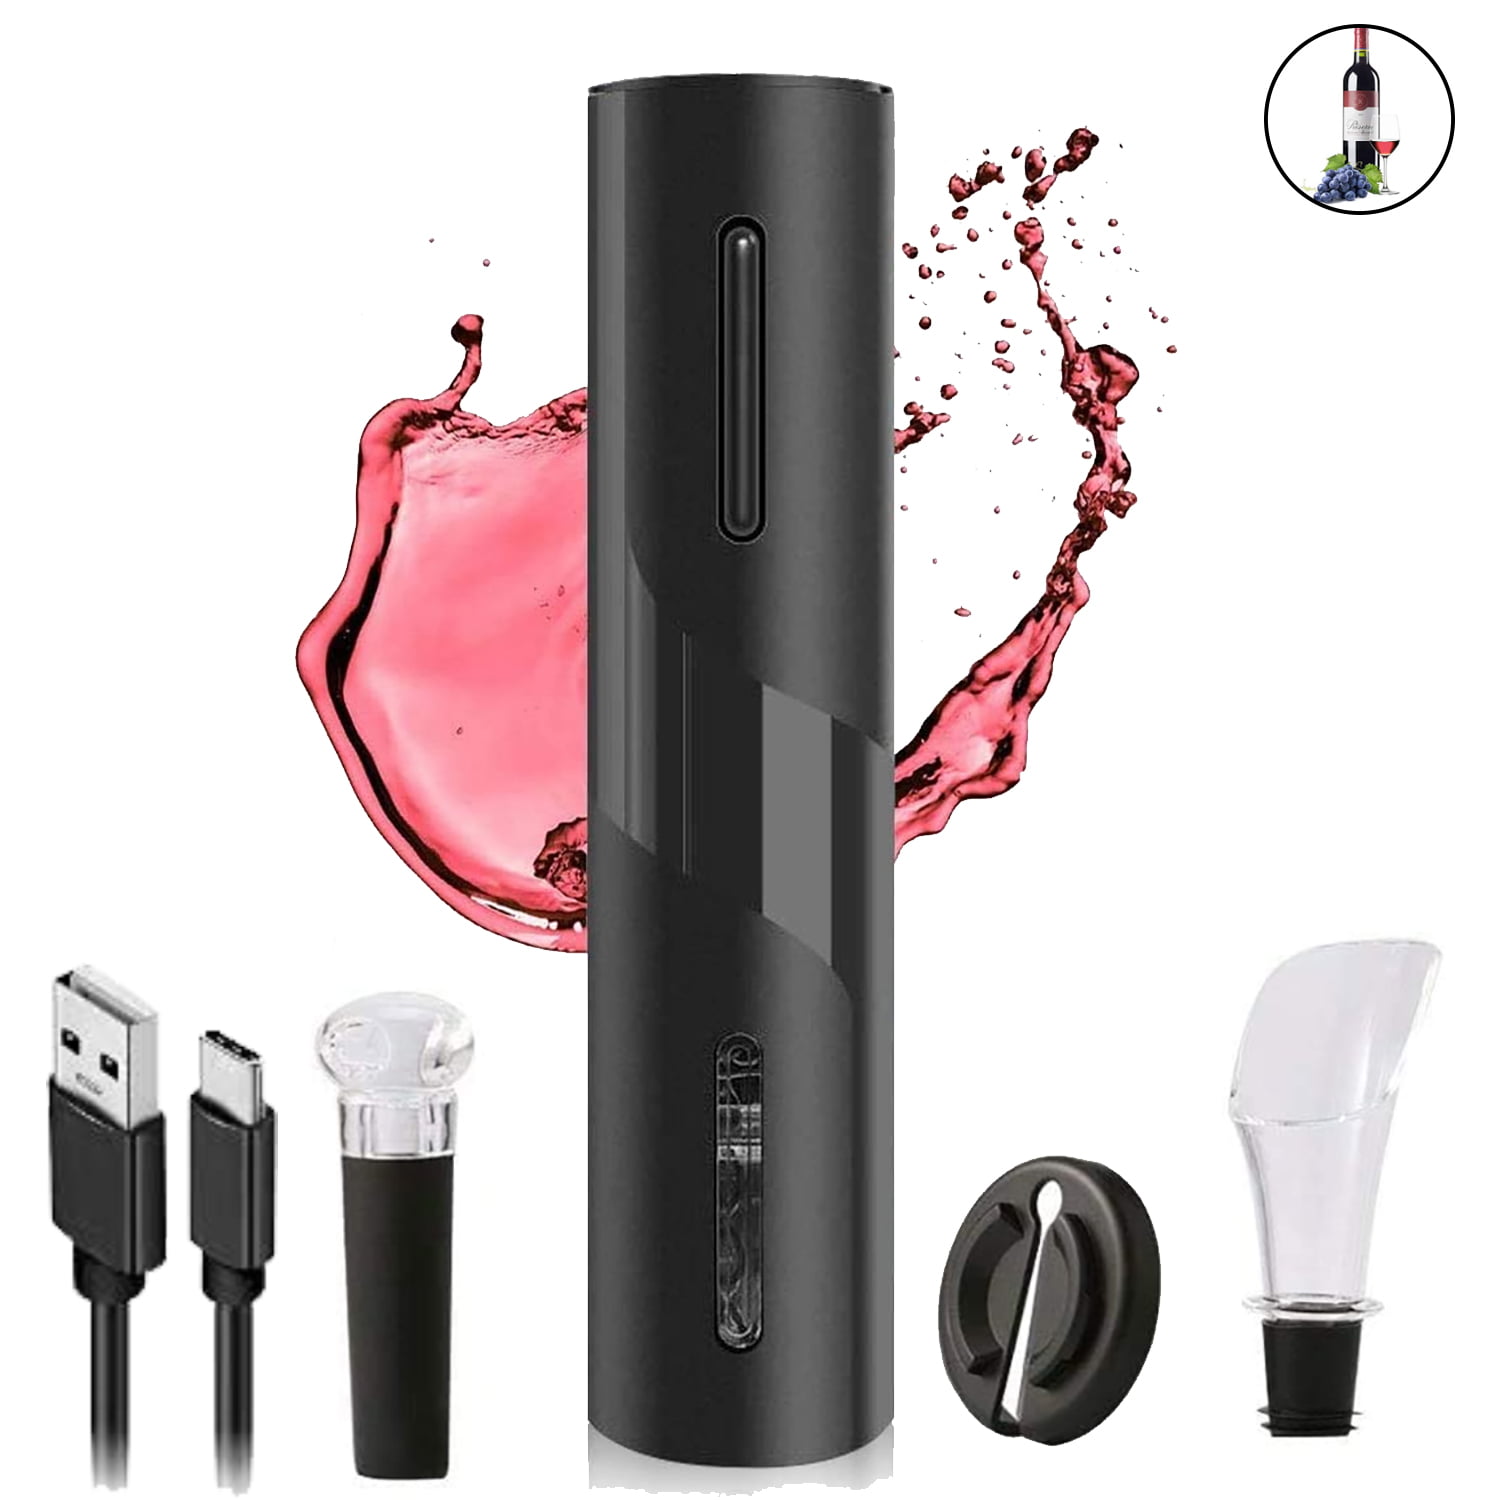 4 in 1 Set Electric Wine Opener Automatic Cordless Wine Bottle Corkscrew Gift